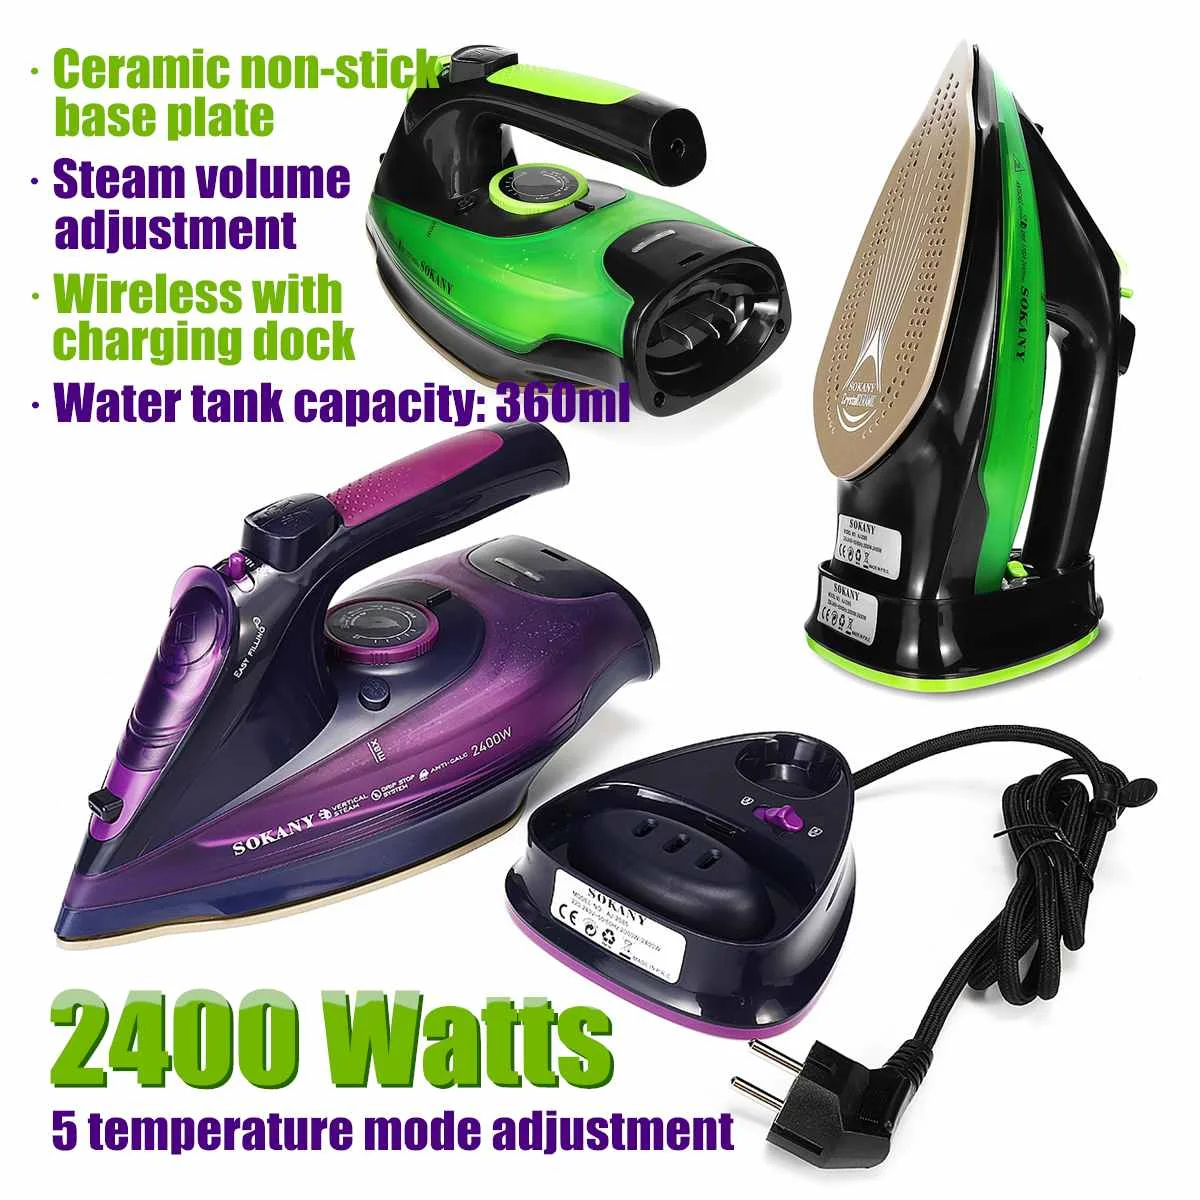 

2400W Electric Rope Steam Iron Cordless Charging Steam Iron 5 Speed Adjust Clothes Ironing Steamer ABS+Ceramic Soleplate EU Plug